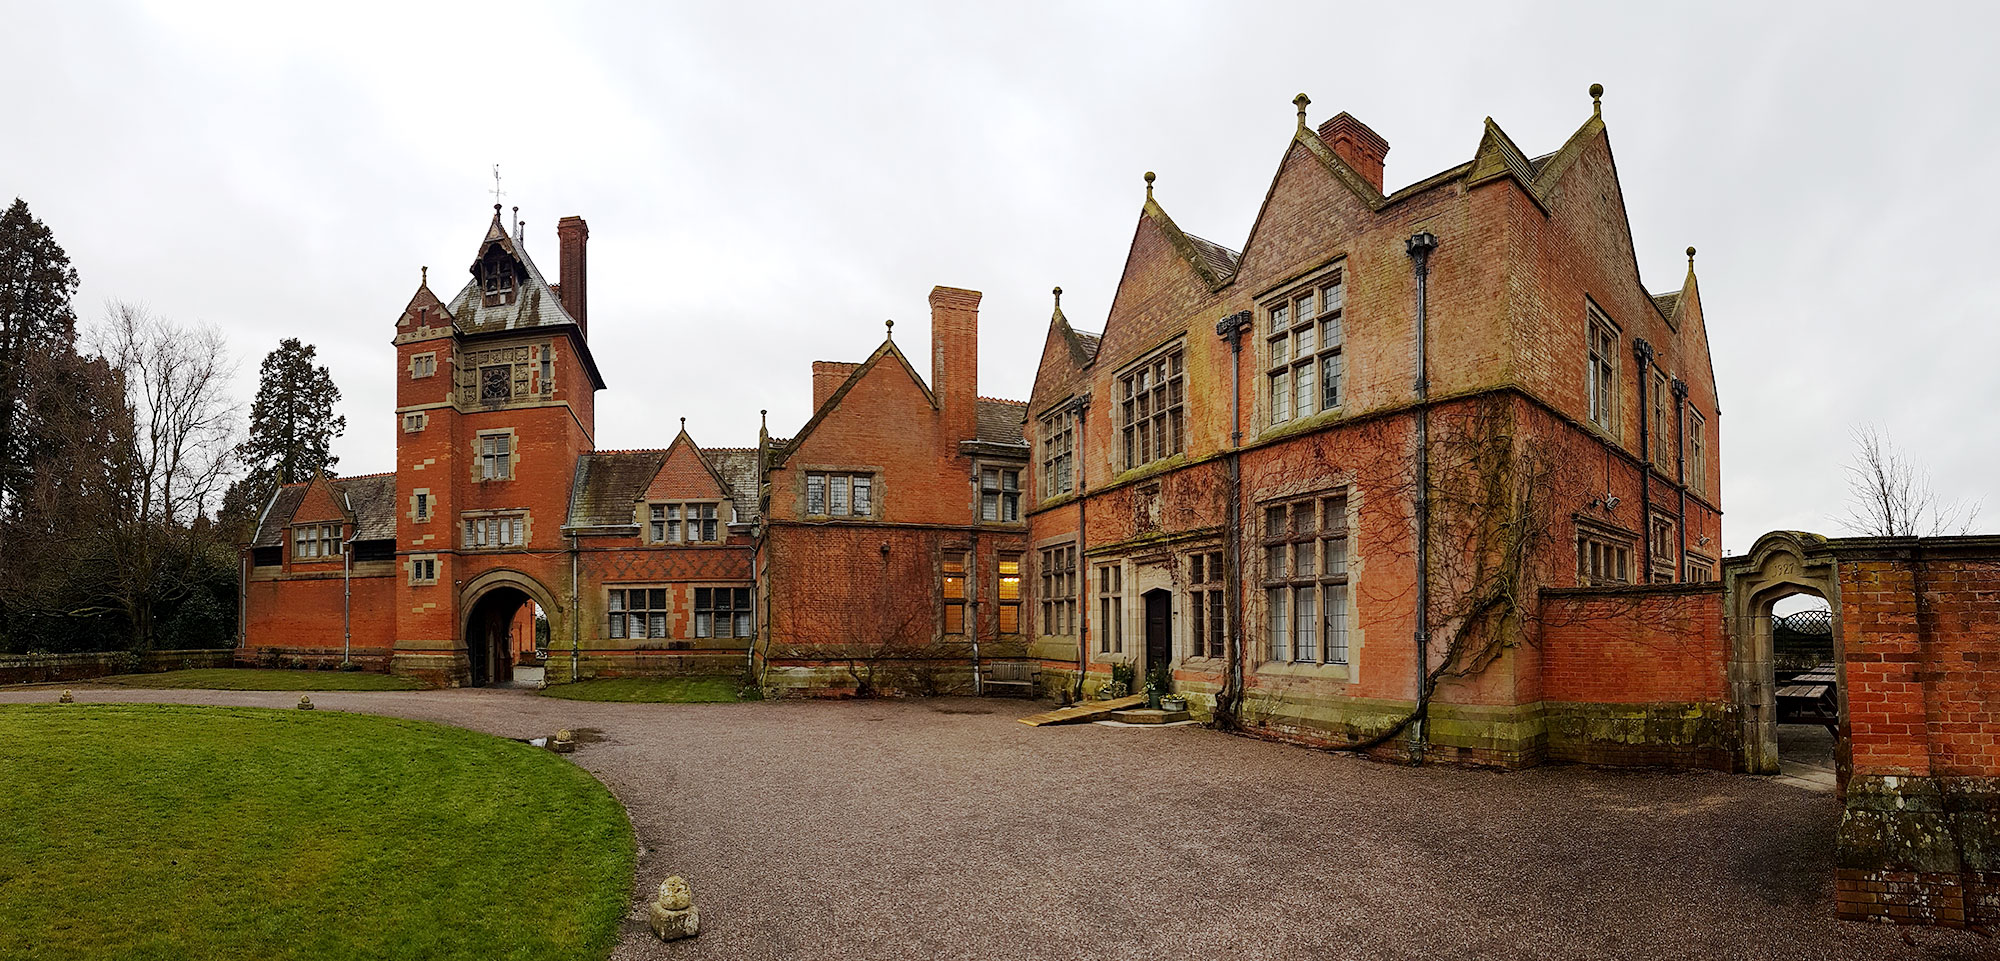 Spring Retreat Conference at Cloverley Hall Shropshire in March 2018